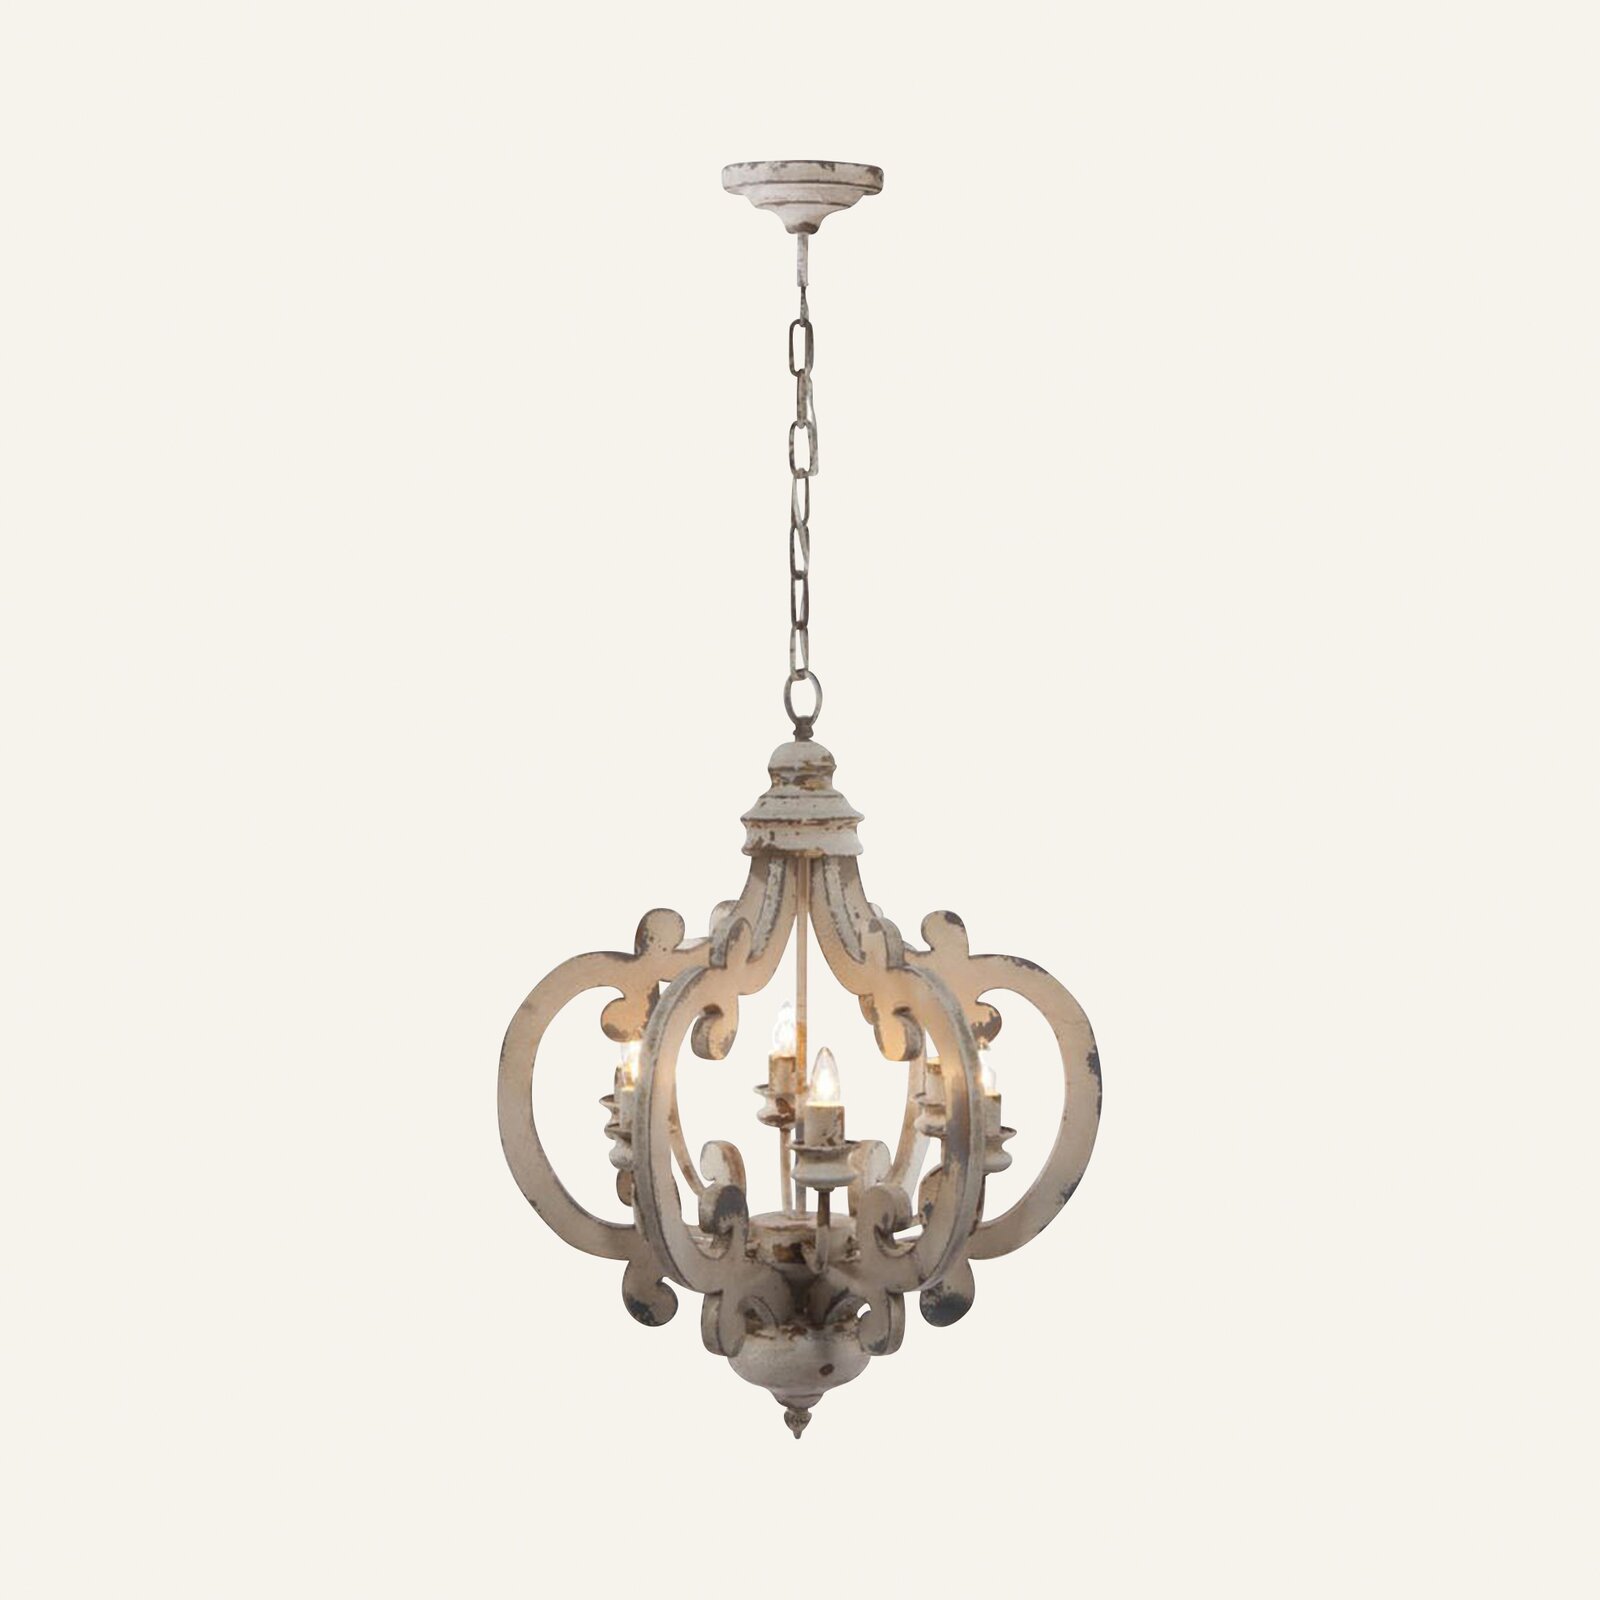 Rustic wood candle holder style chandelier is beautiful in dining areas, bedrooms, and kitchens when you want a European inspired, aged and retro look.